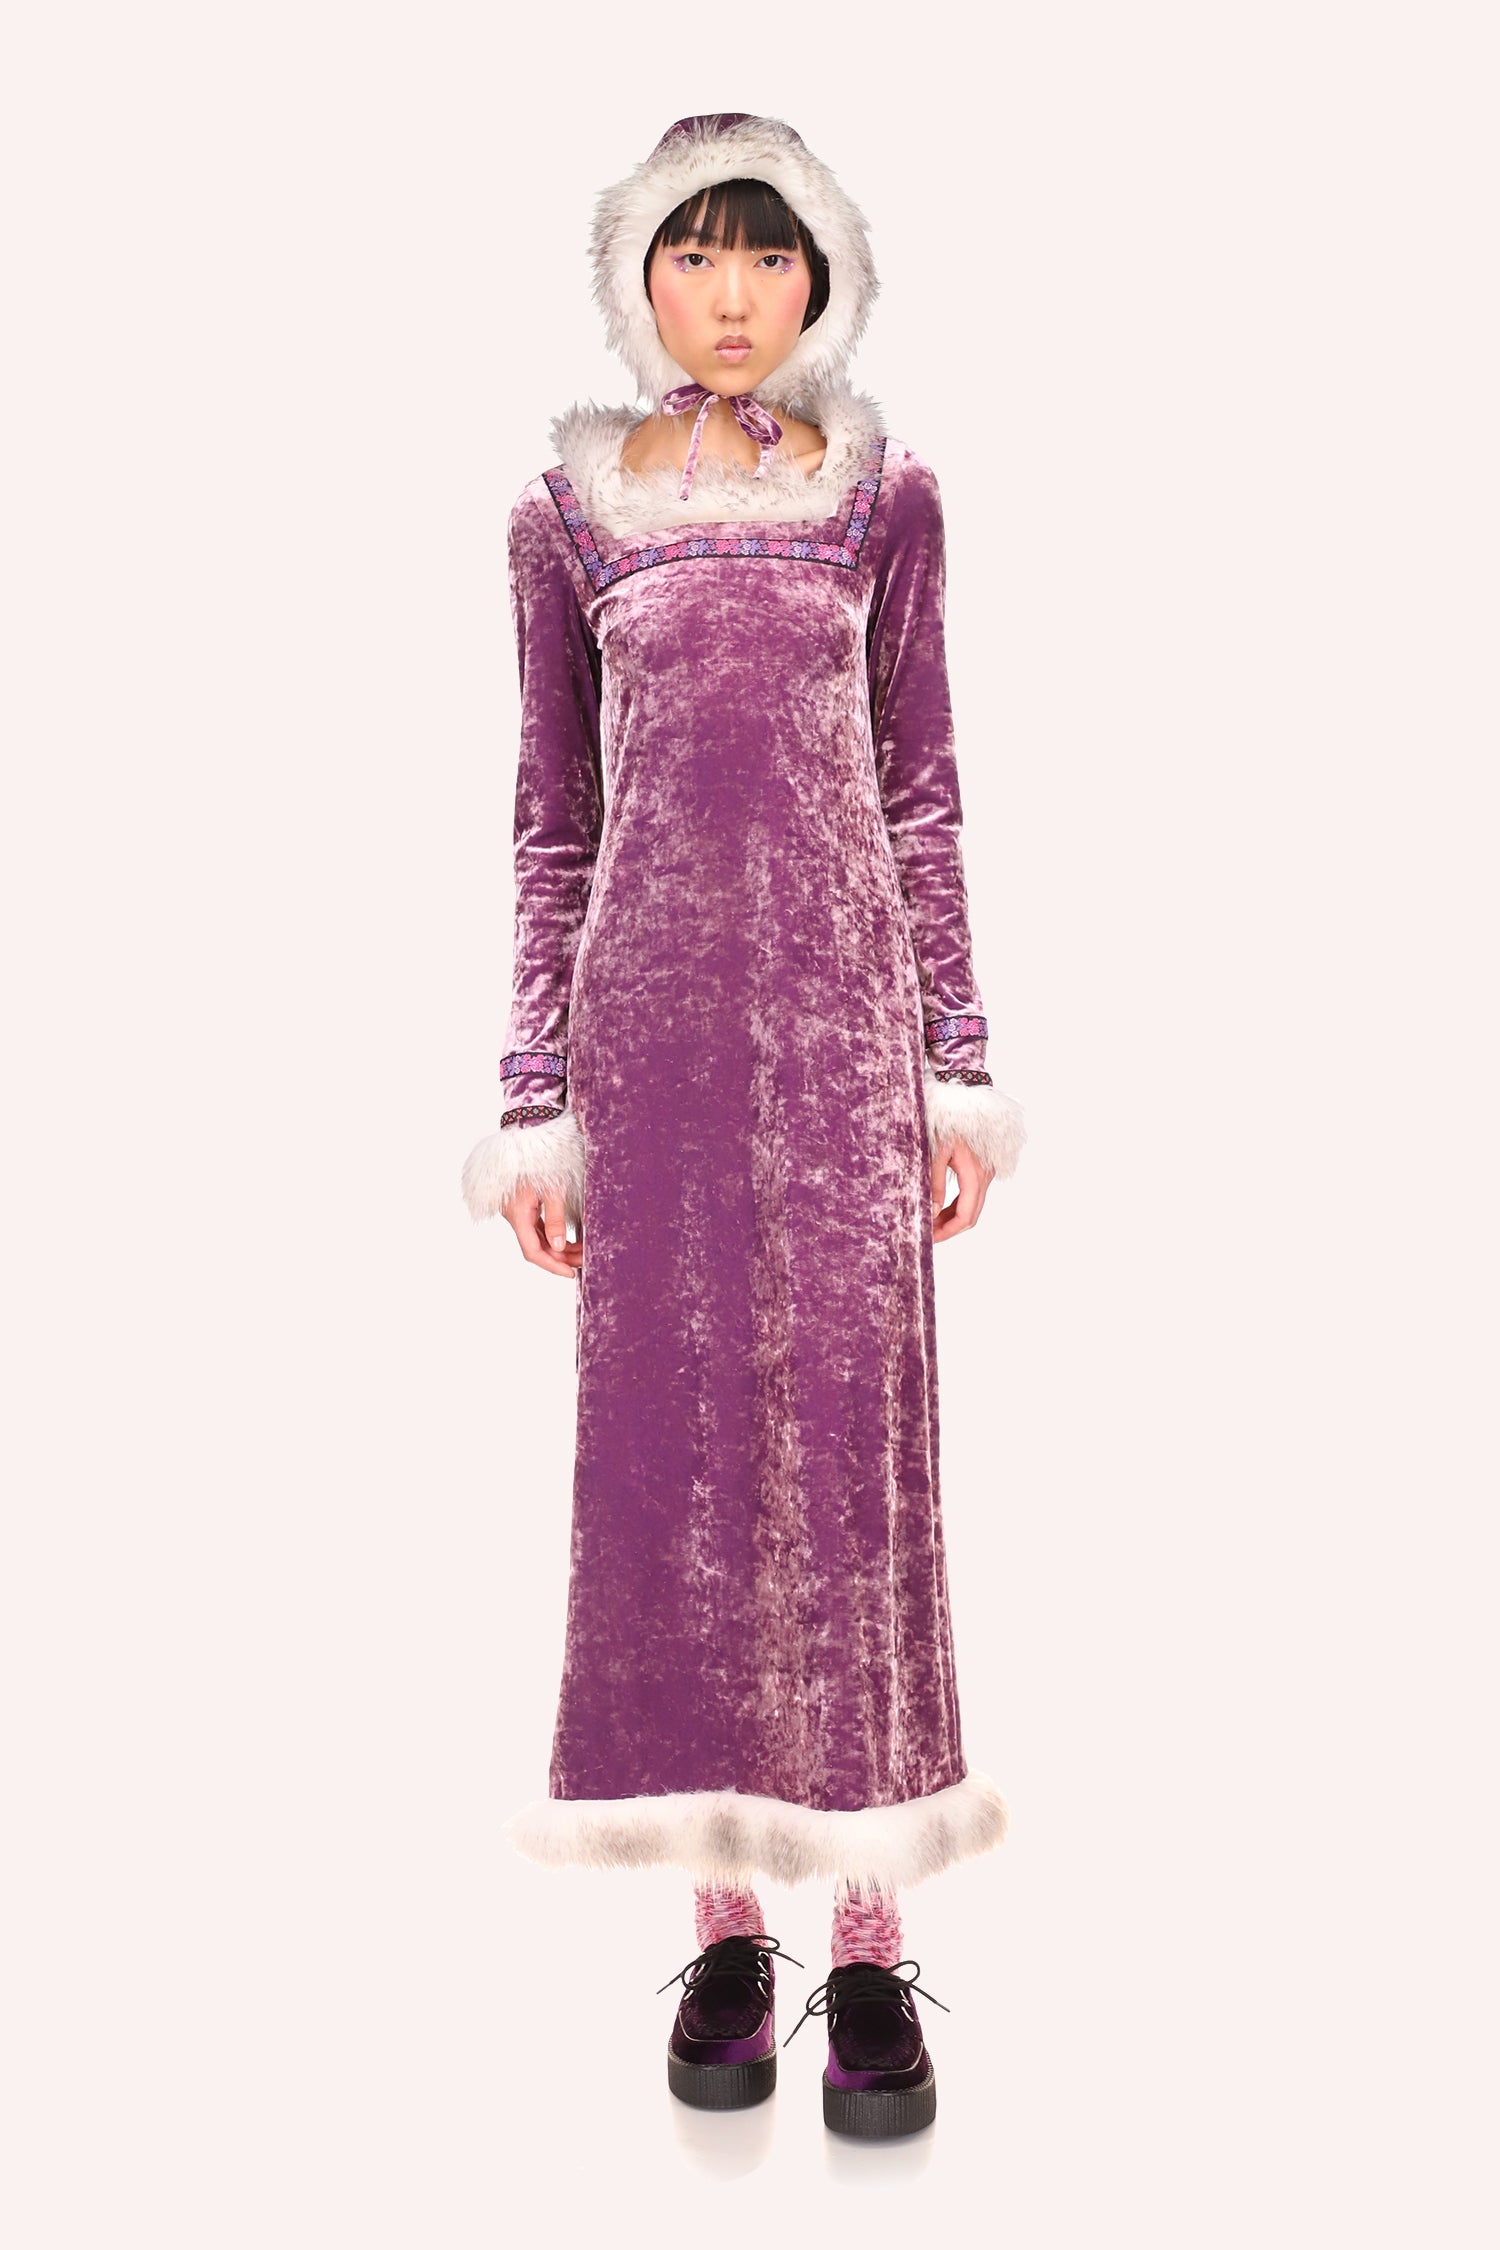  Princess Audrey Dress Lavender ankles long, long sleeves, plush faux fur at seams, collar in squared shaped 